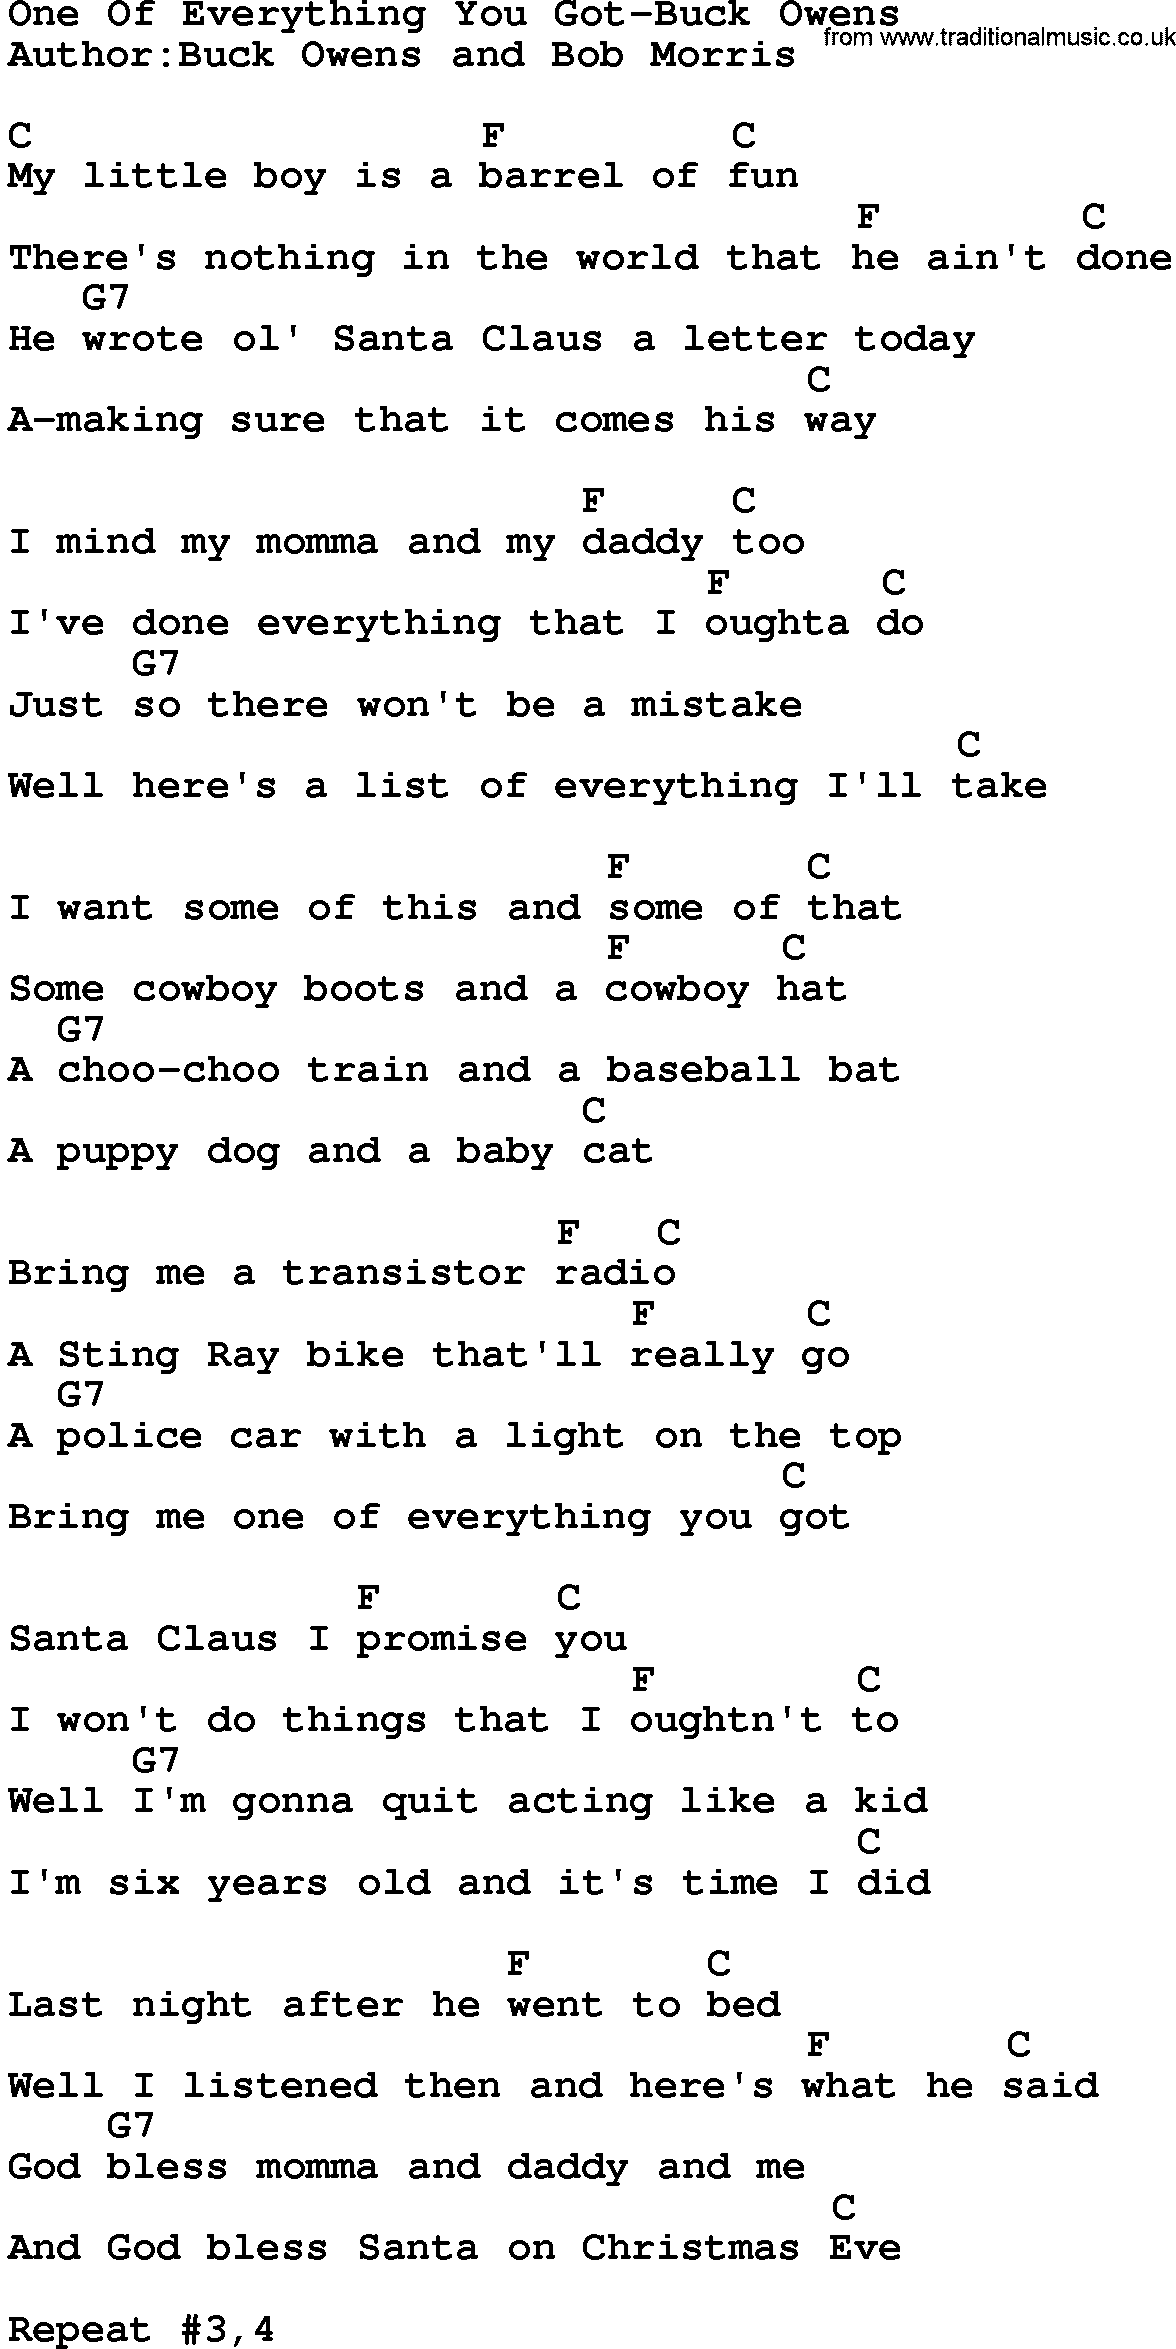 Country music song: One Of Everything You Got-Buck Owens lyrics and chords